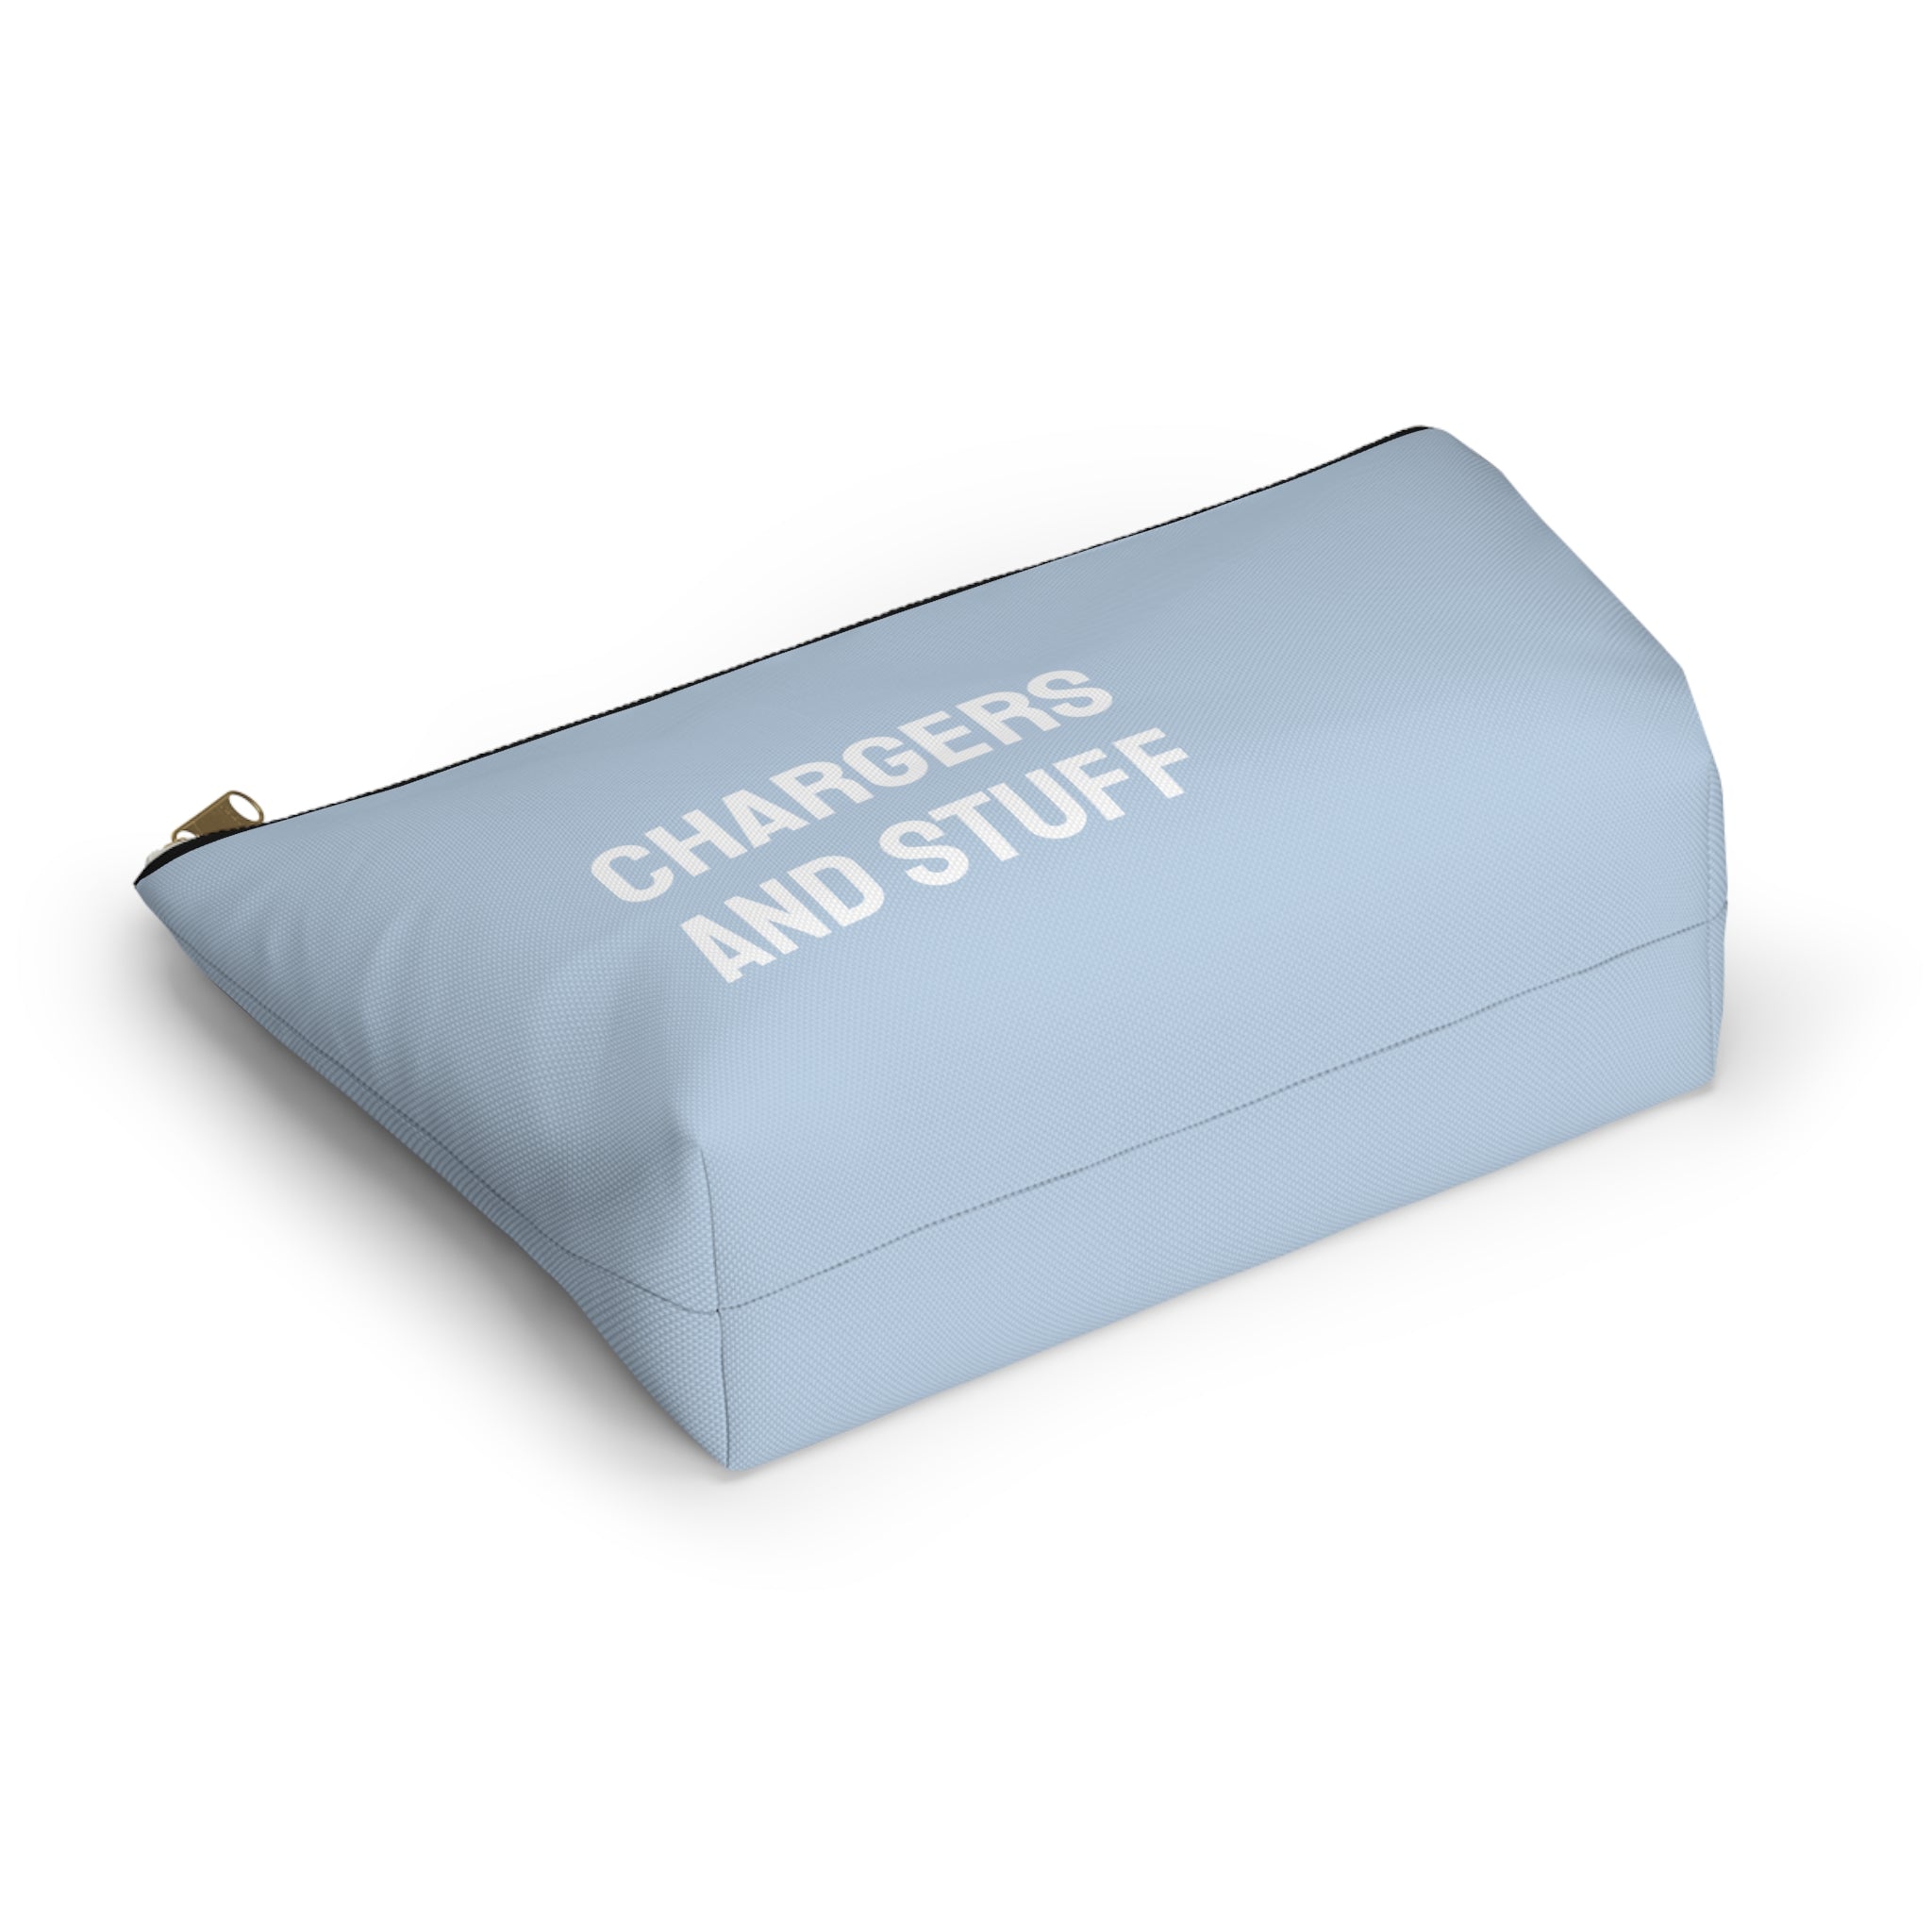 Chargers & stuff Pouch (Blue)